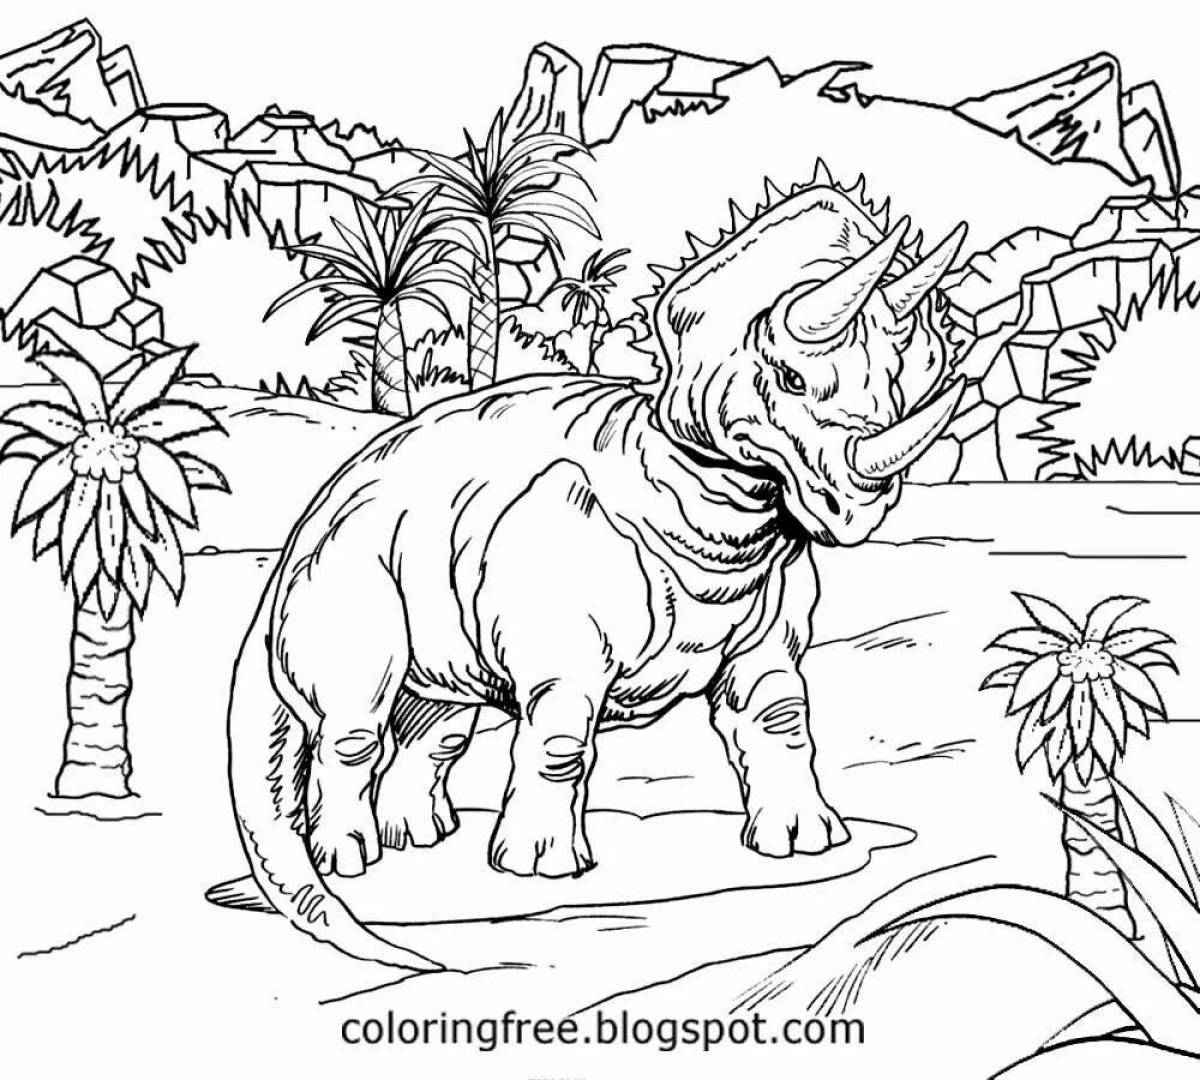 Tempting Jurassic Coloring Page